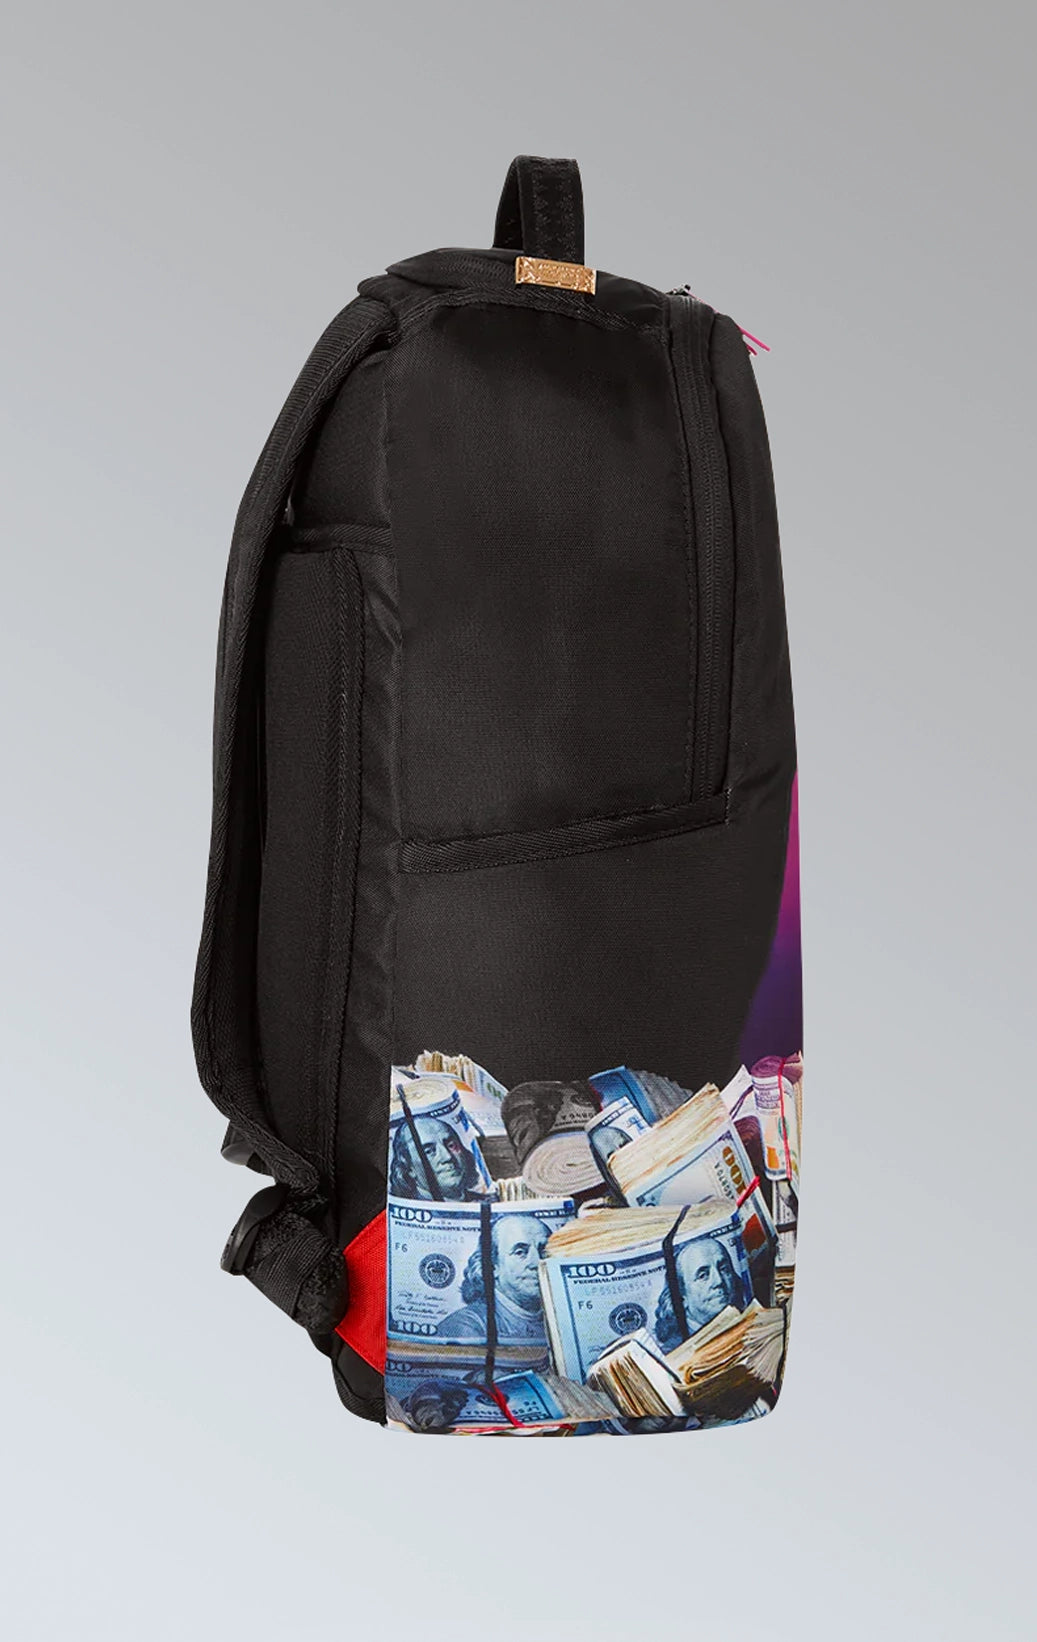 SPRAYGROUND MONEY ABDUCTION GRAPHIC ON Black backpack with numerous compartments and pockets, including a separate padded laptop sleeve. Features comfortable mesh back padding and adjustable straps. Made from durable vegan leather.